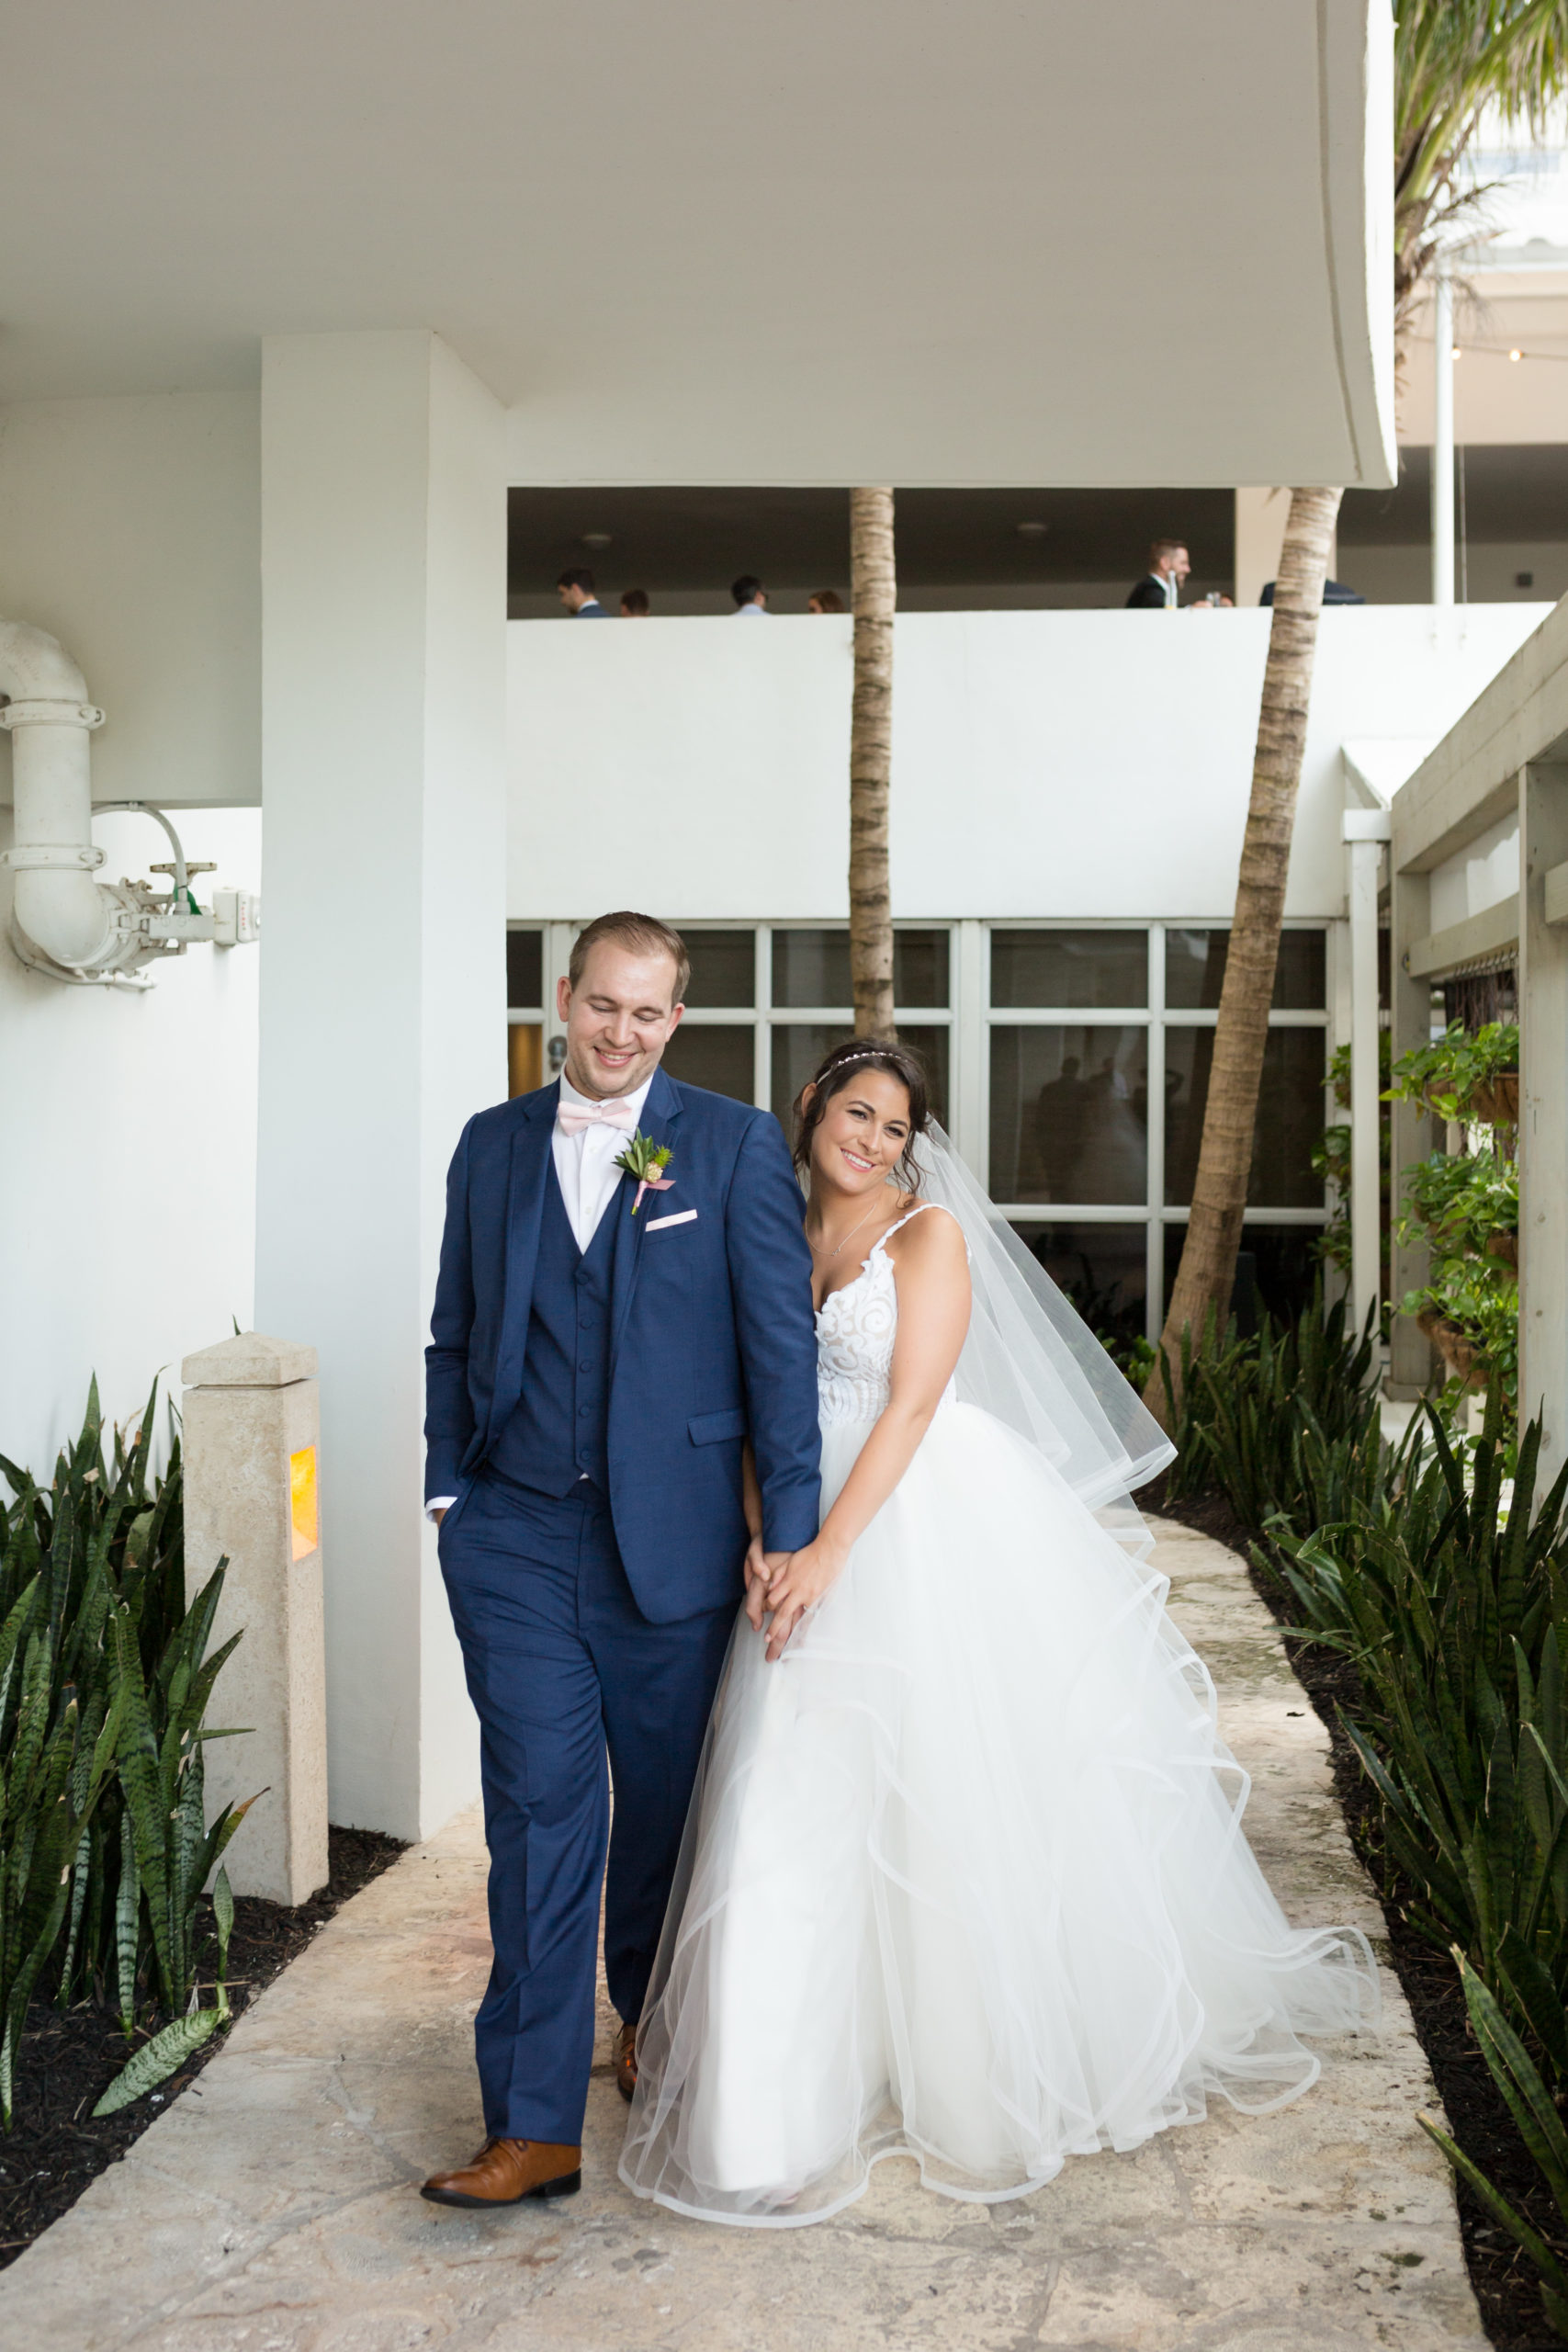 Adorable bride and groom photo posing together at The Confidante in Miami Beach, wedding planned by Oh My Occasions